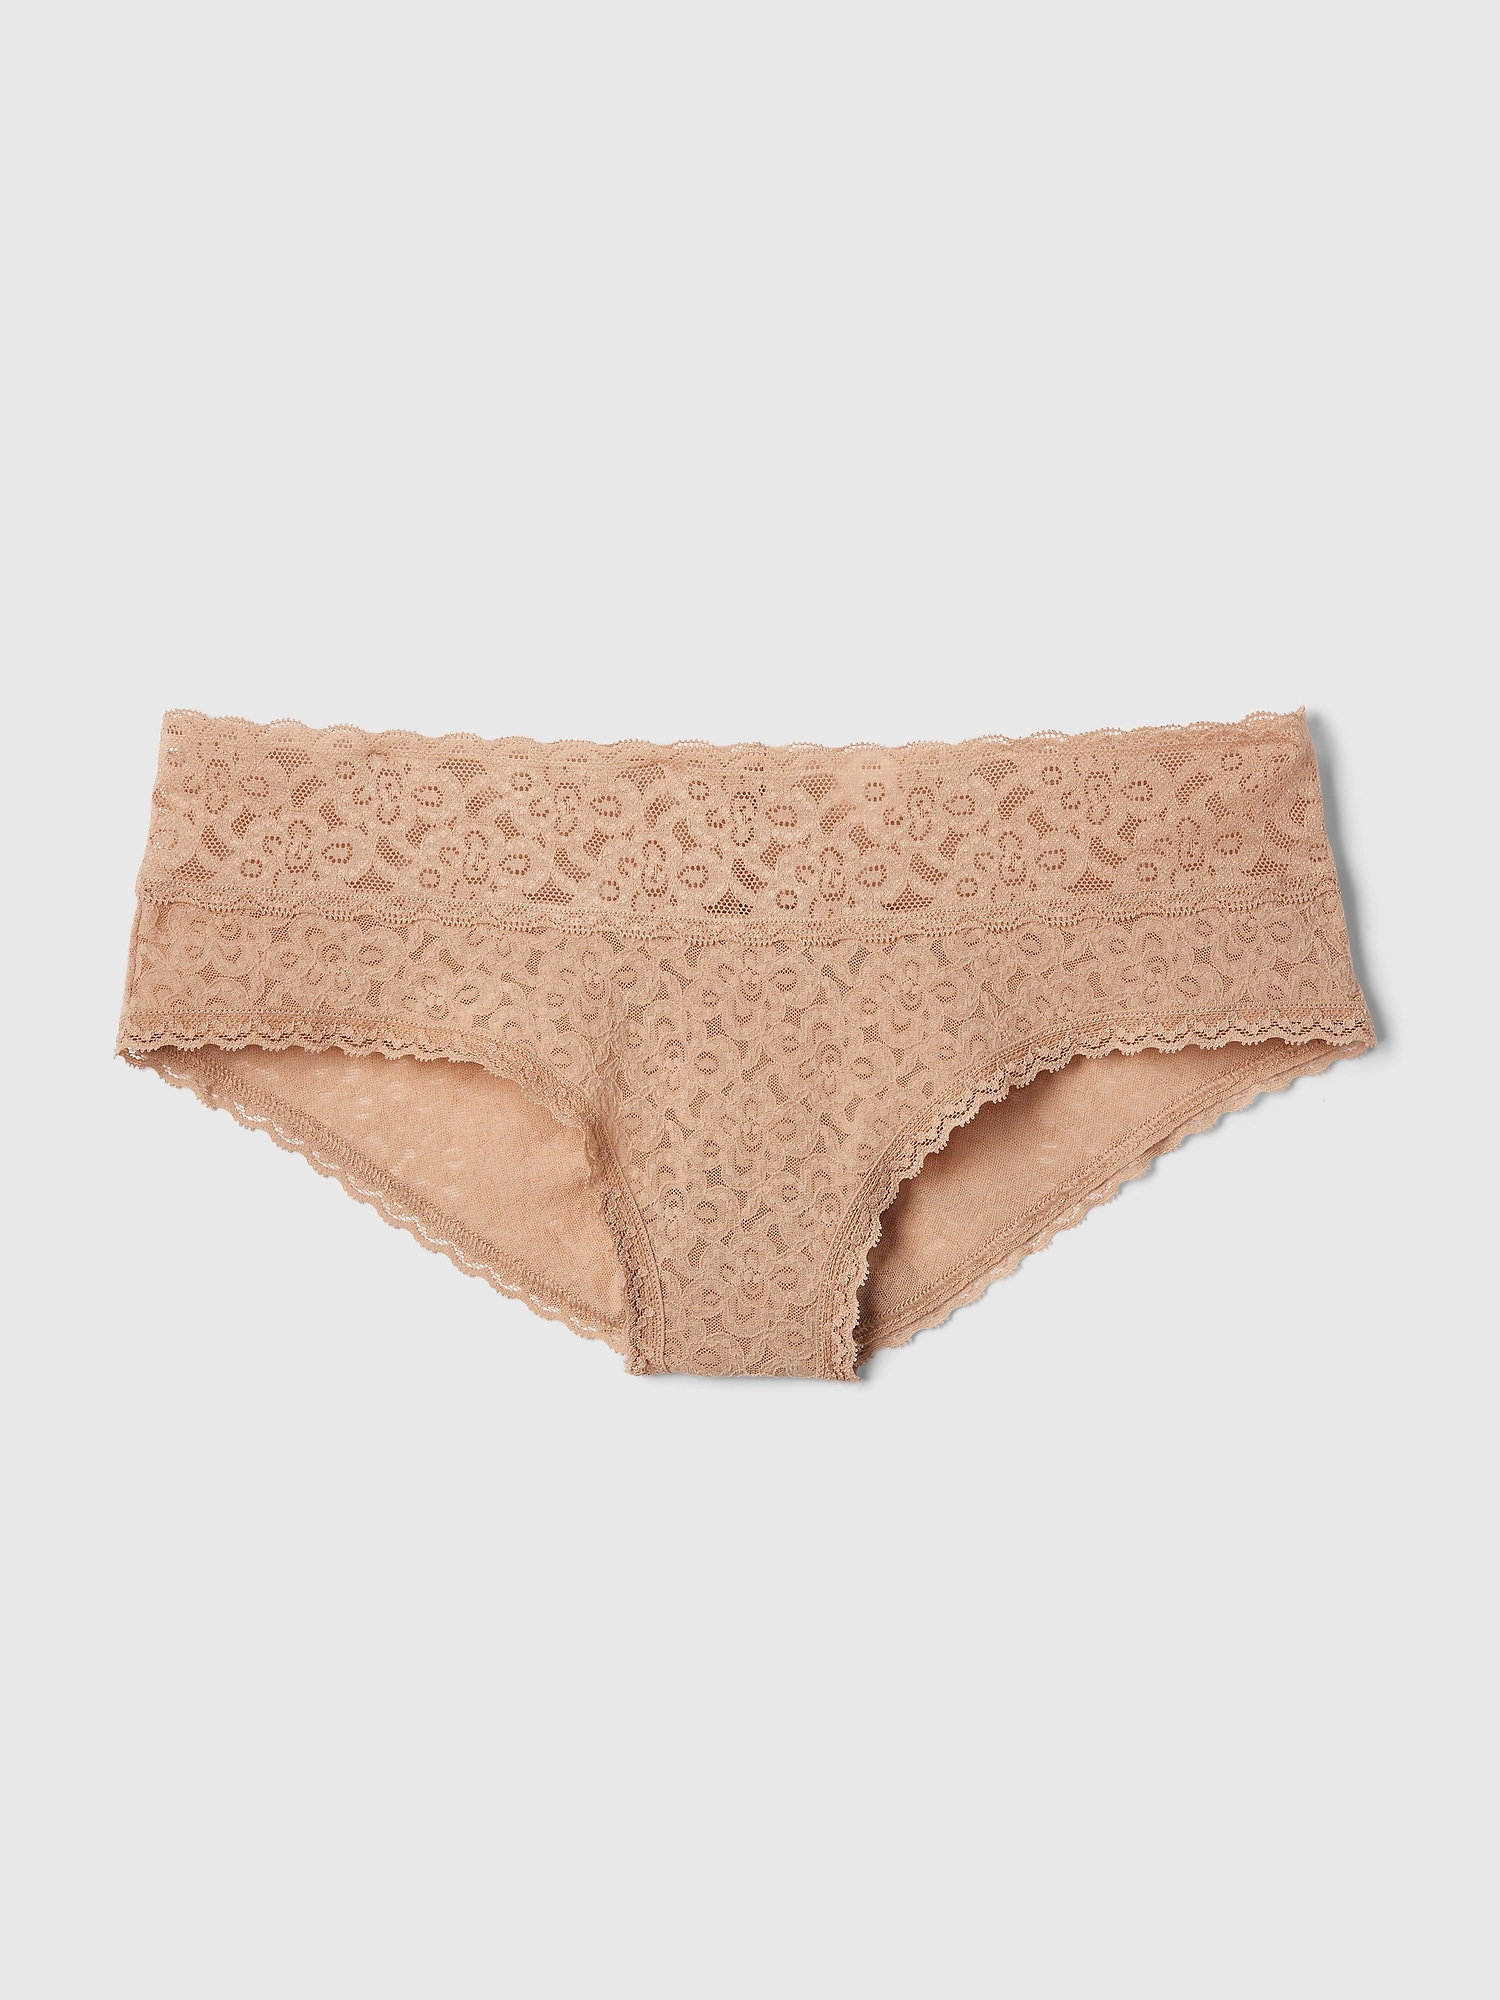 Buy Lace-Trim Cheeky Panty M, Women's Clothing, Montreal Duty Free